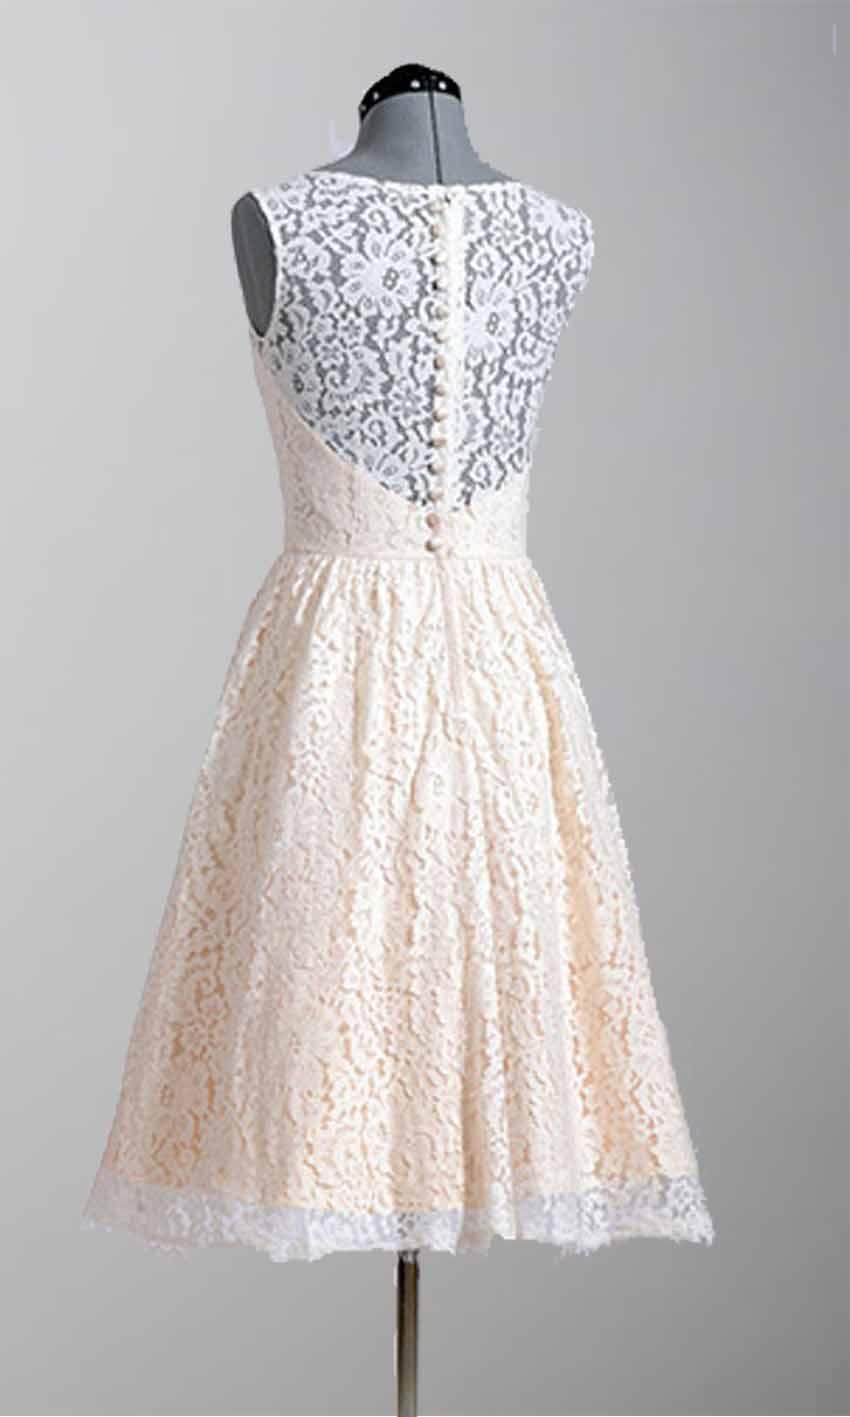 Свадьба - Knee Length Modern Lace Vintage Wedding Party Dresses KSP296 [KSP296] - £89.00 : Cheap Prom Dresses Uk, Bridesmaid Dresses, 2014 Prom & Evening Dresses, Look for cheap elegant prom dresses 2014, cocktail gowns, or dresses for special occasions? kissprom.c